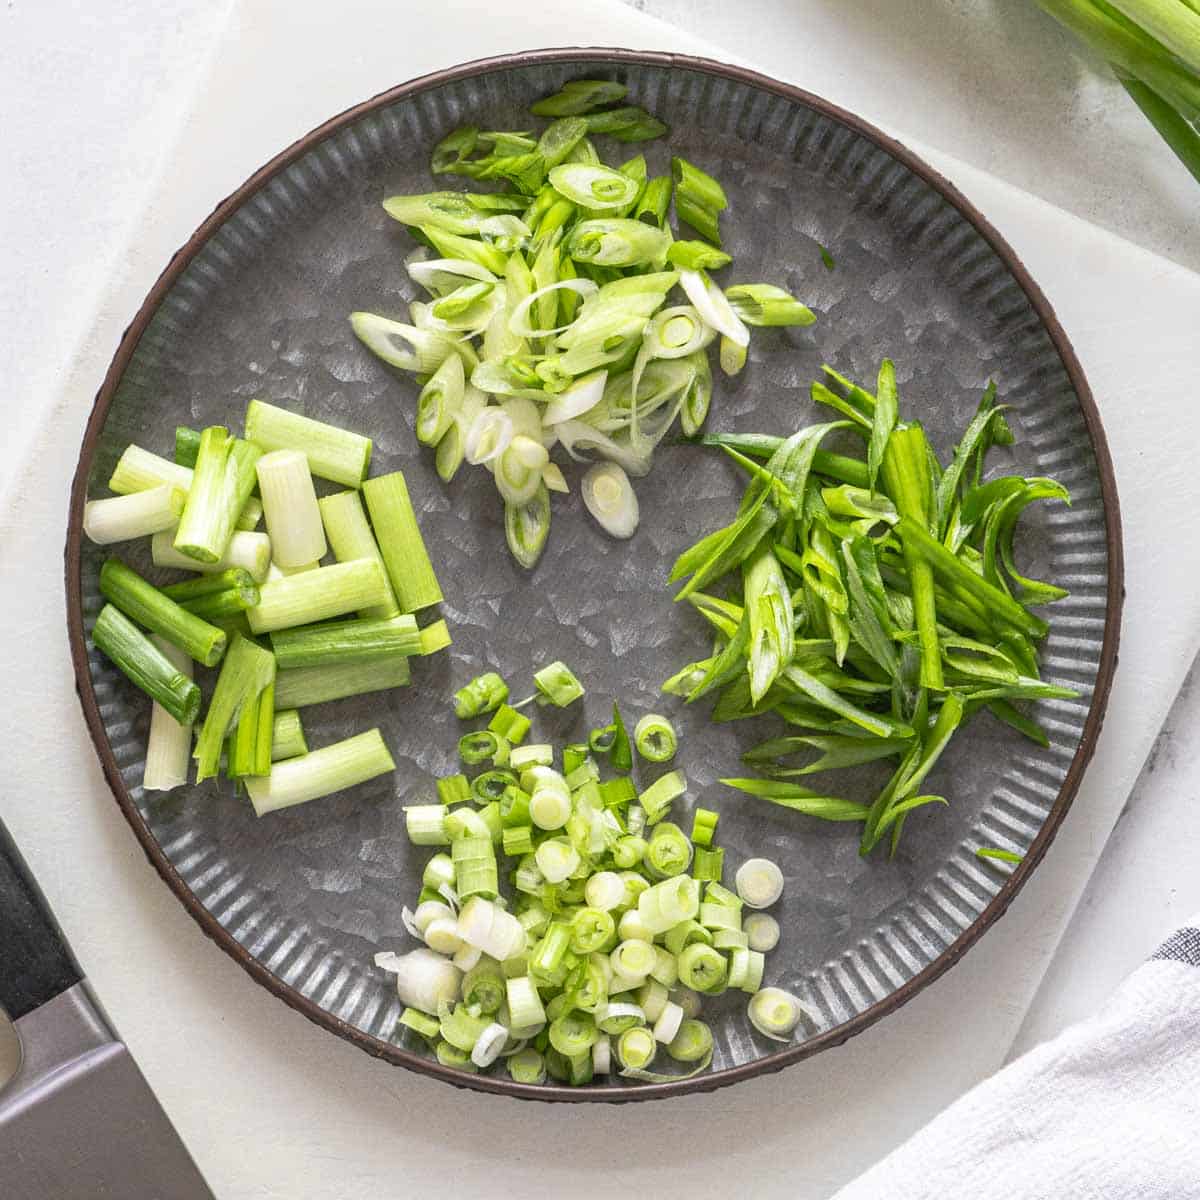 How to Cut Green Onions (Scallions) - Peel with Zeal